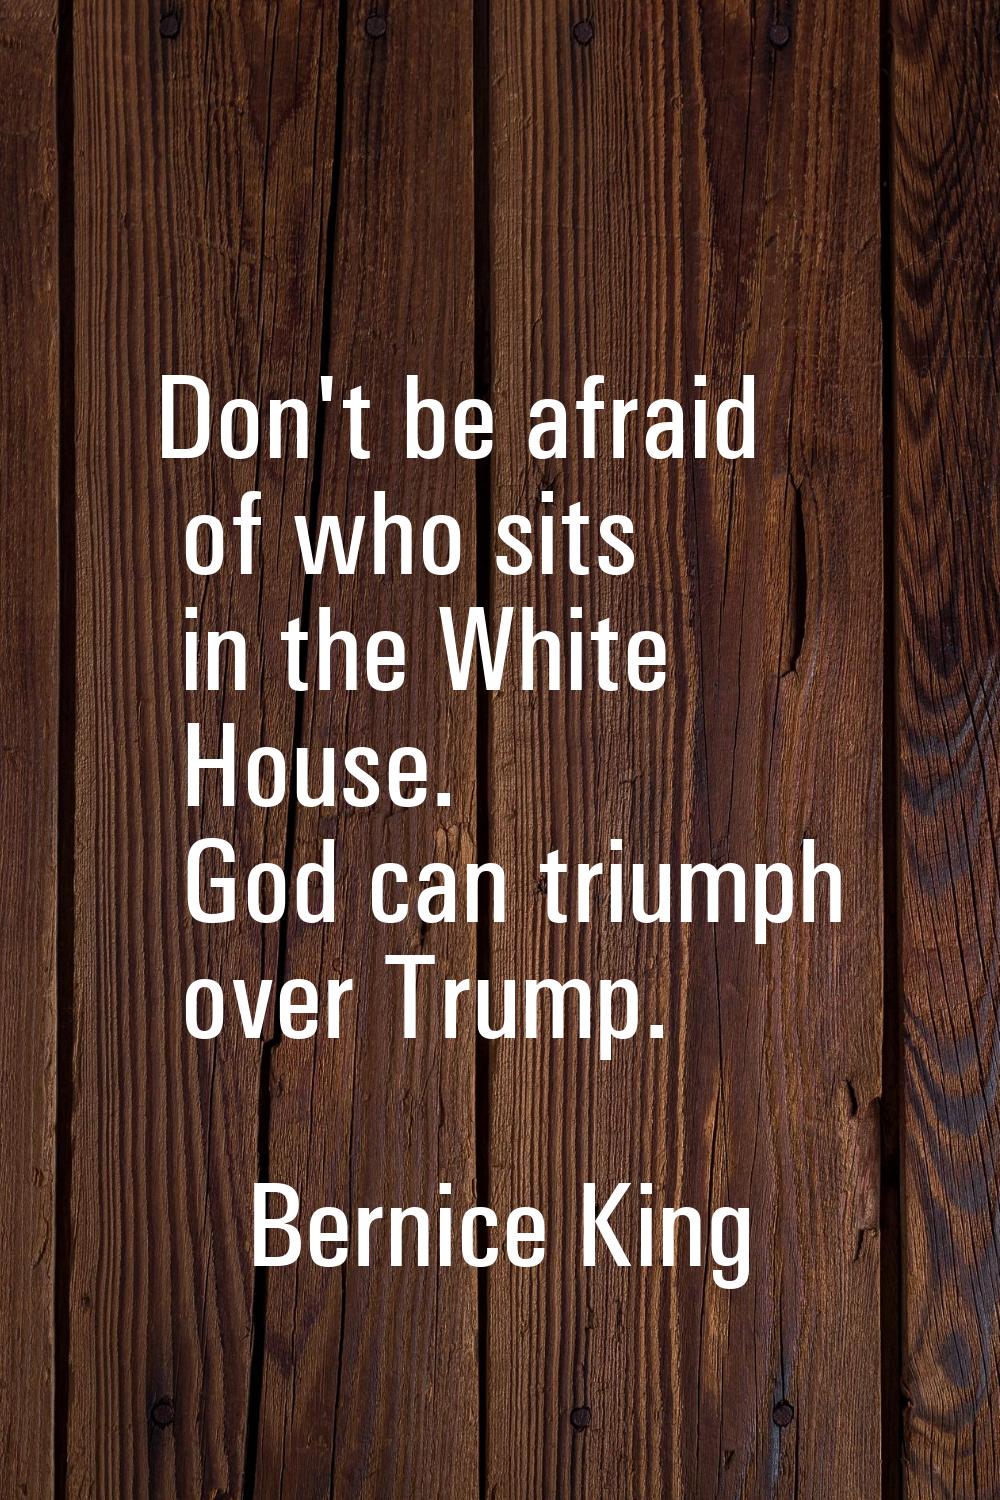 Don't be afraid of who sits in the White House. God can triumph over Trump.